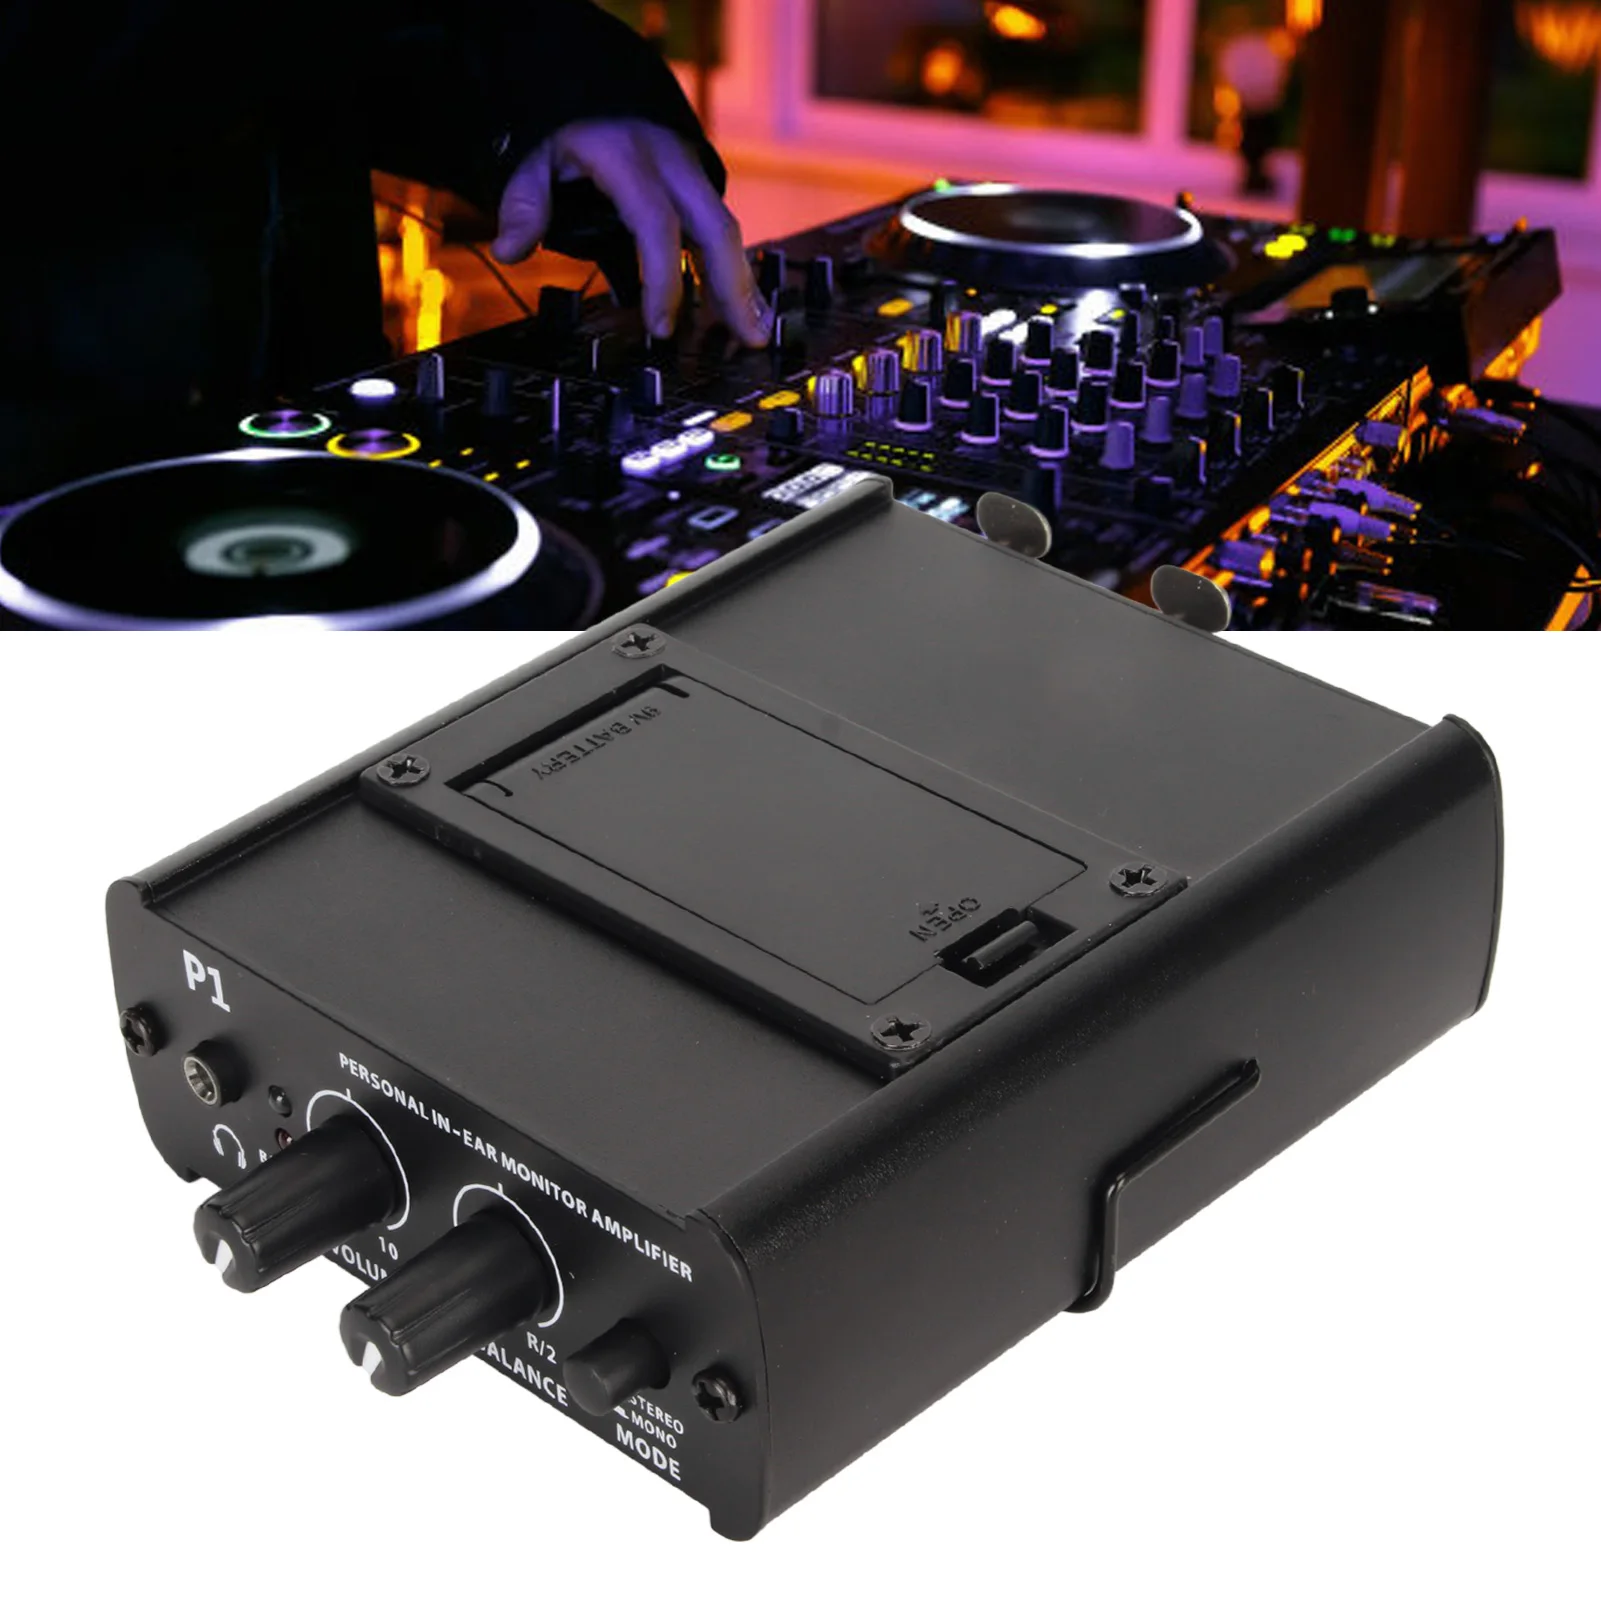 https://ae01.alicdn.com/kf/S1af2c14ba0cd40c39647a8469c821d338/Portable-Headphone-Amplifier-2CH-Stereo-Passive-Mixer-Portable-Studio-Headphone-Amplifier-Mixer-hot.jpg